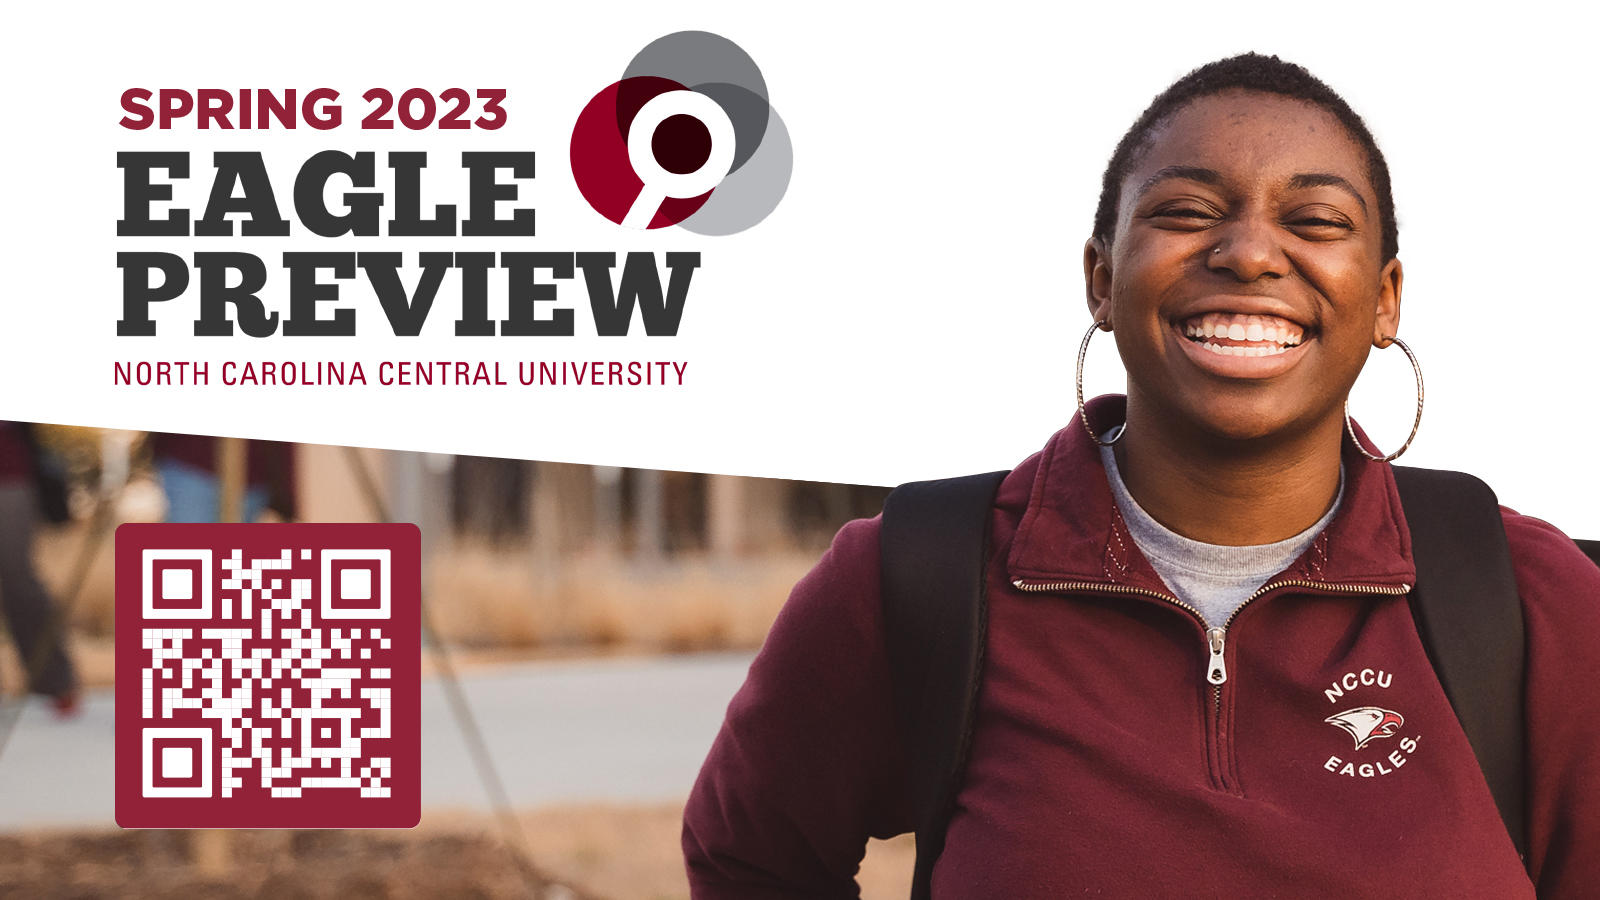 Spring 2023 Eagle Preview (Open House) North Carolina Central University